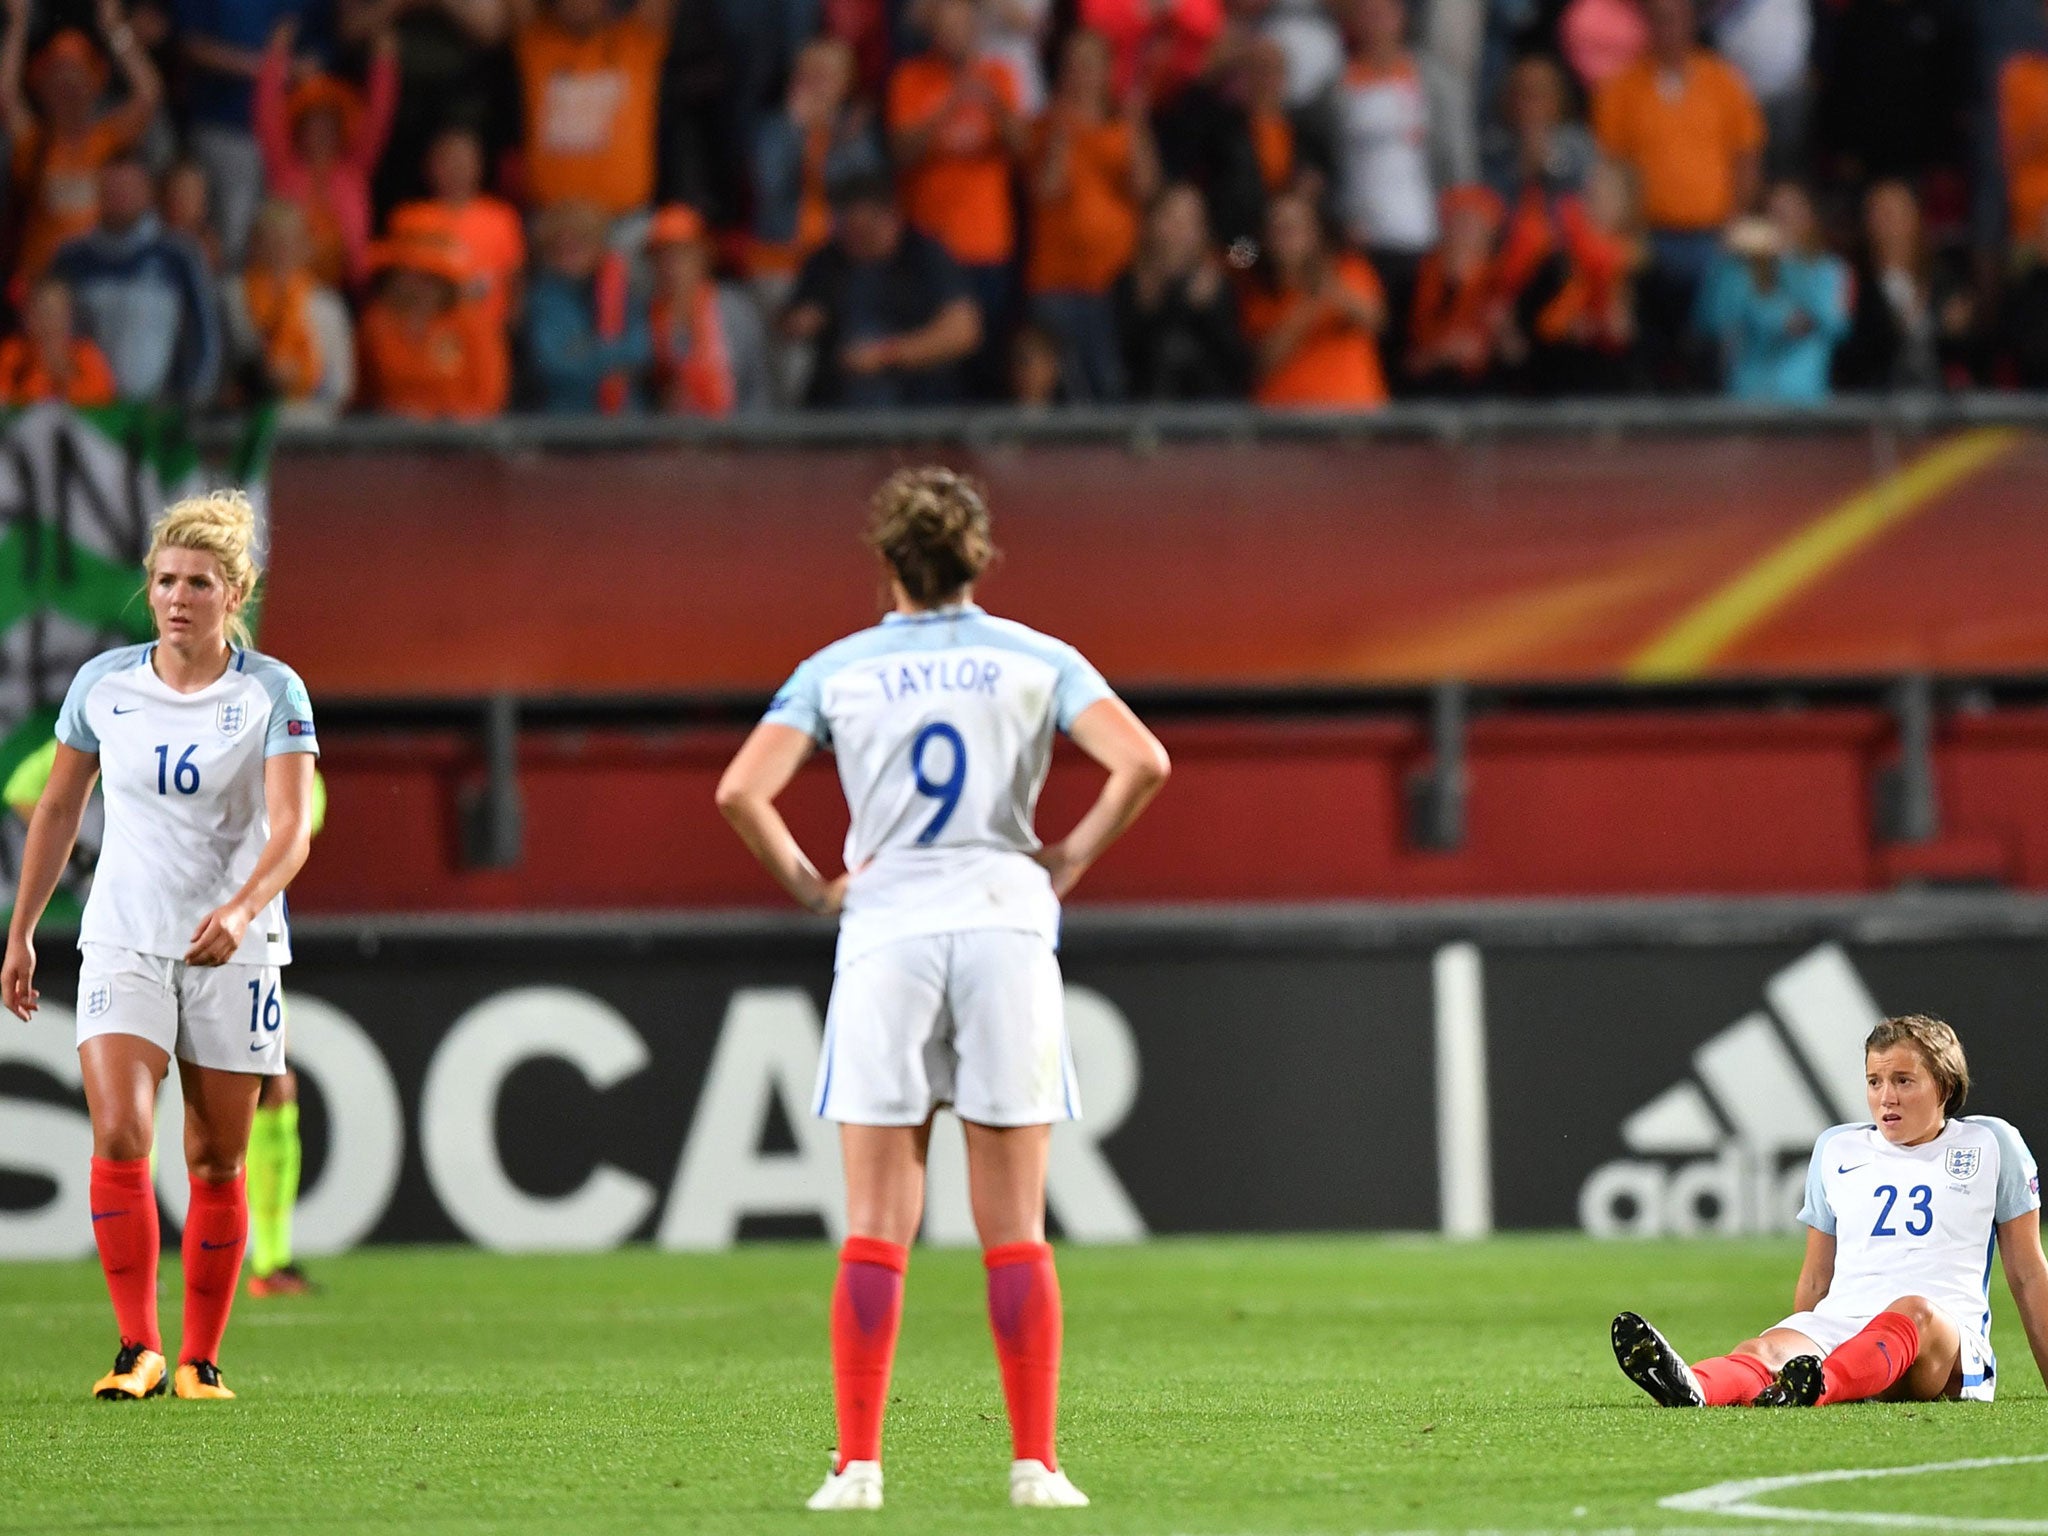 England's dejected players look on after defeat